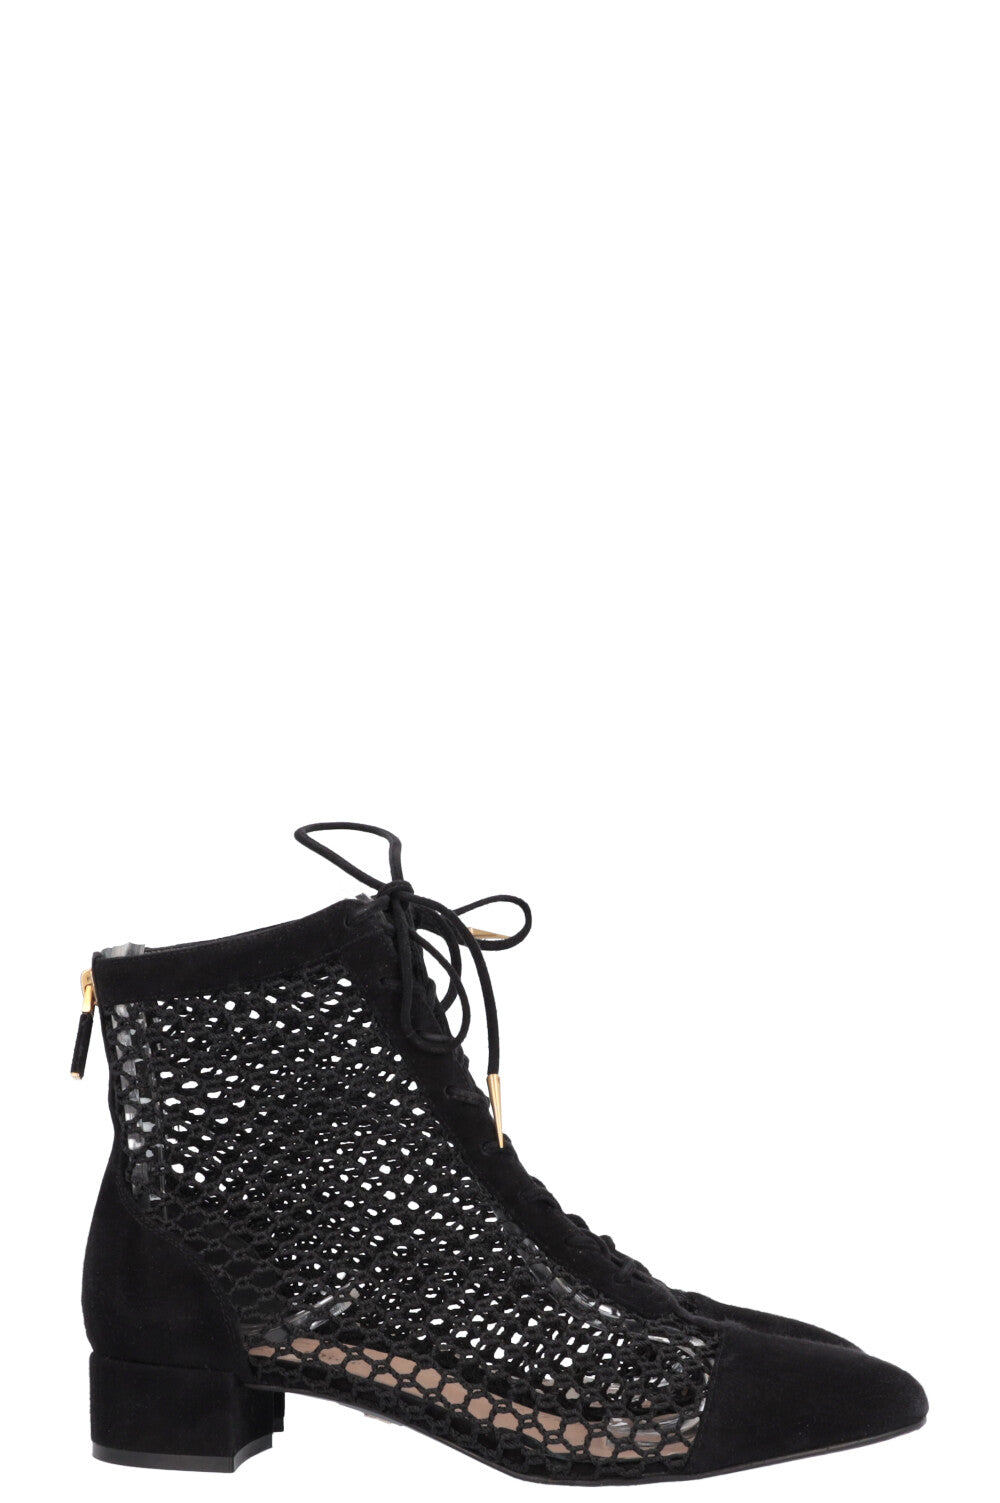 CHRISTIAN DIOR Naughtily-D Boots Black